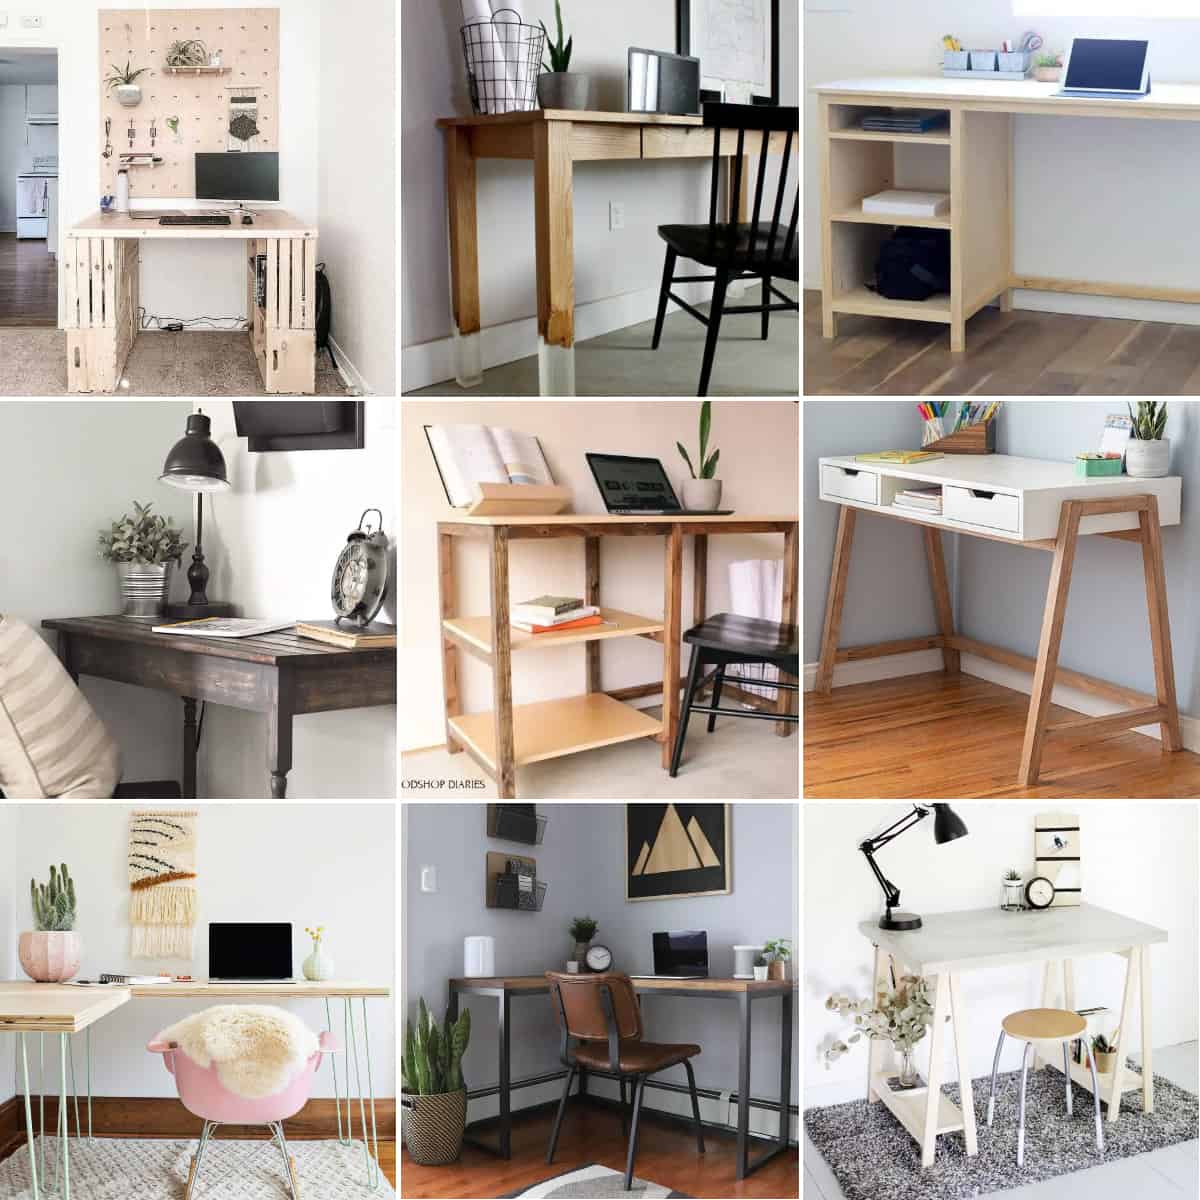 15 DIY Desk Ideas for Small Spaces That Work